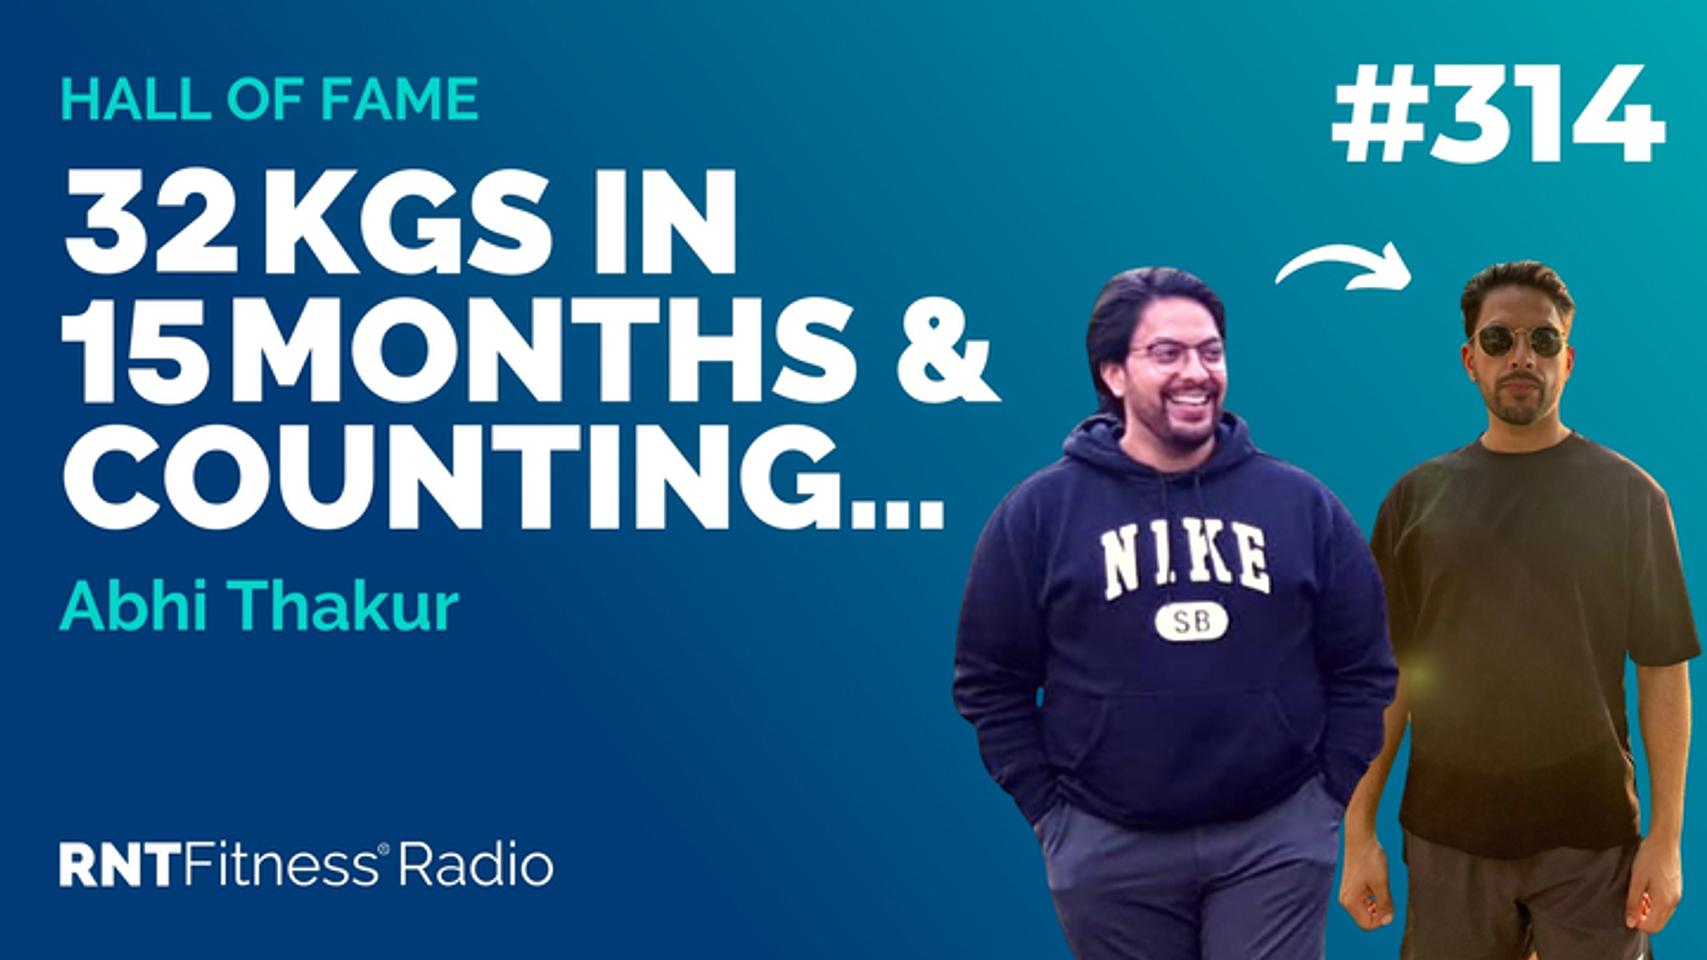 Ep 314 - Hall Of Fame | Abhi Thakur: 32kgs In 15 Months & Counting…